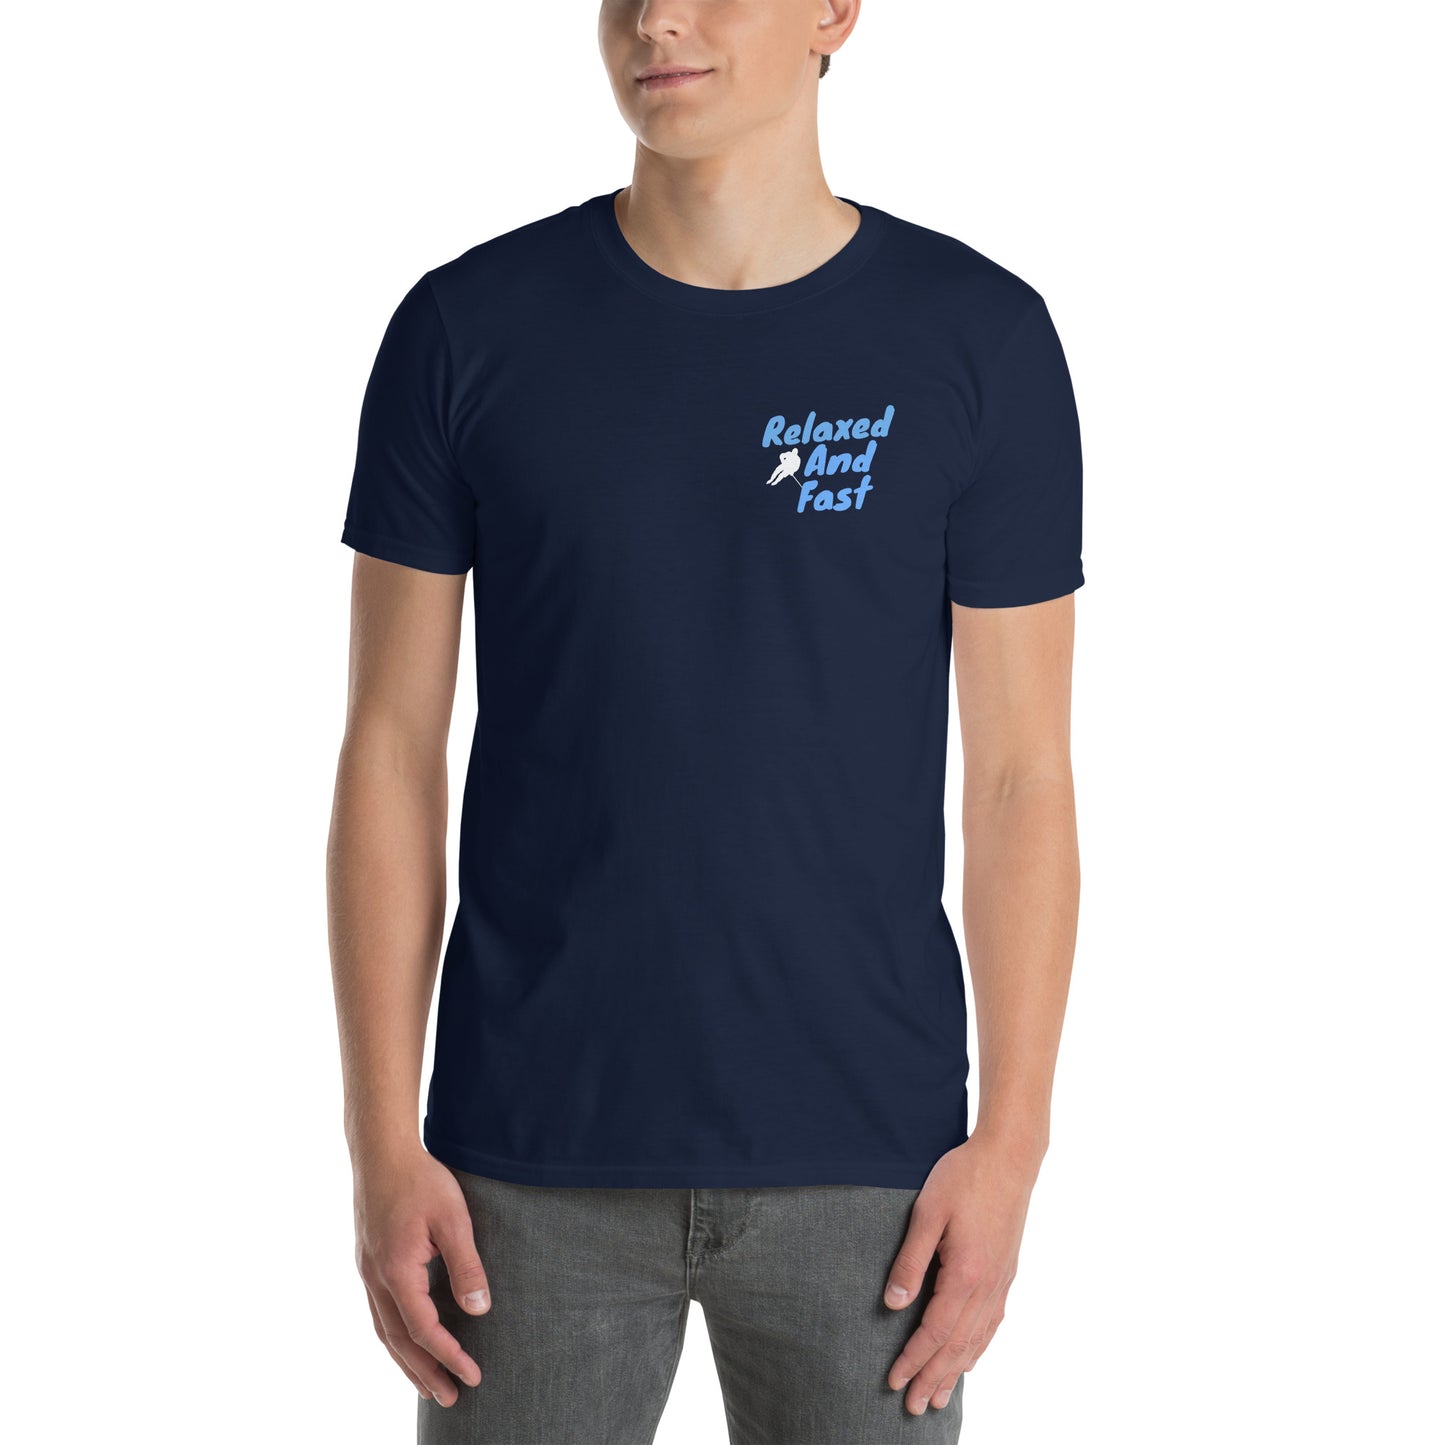 Relaxed and Fast - Unisex T-Shirt